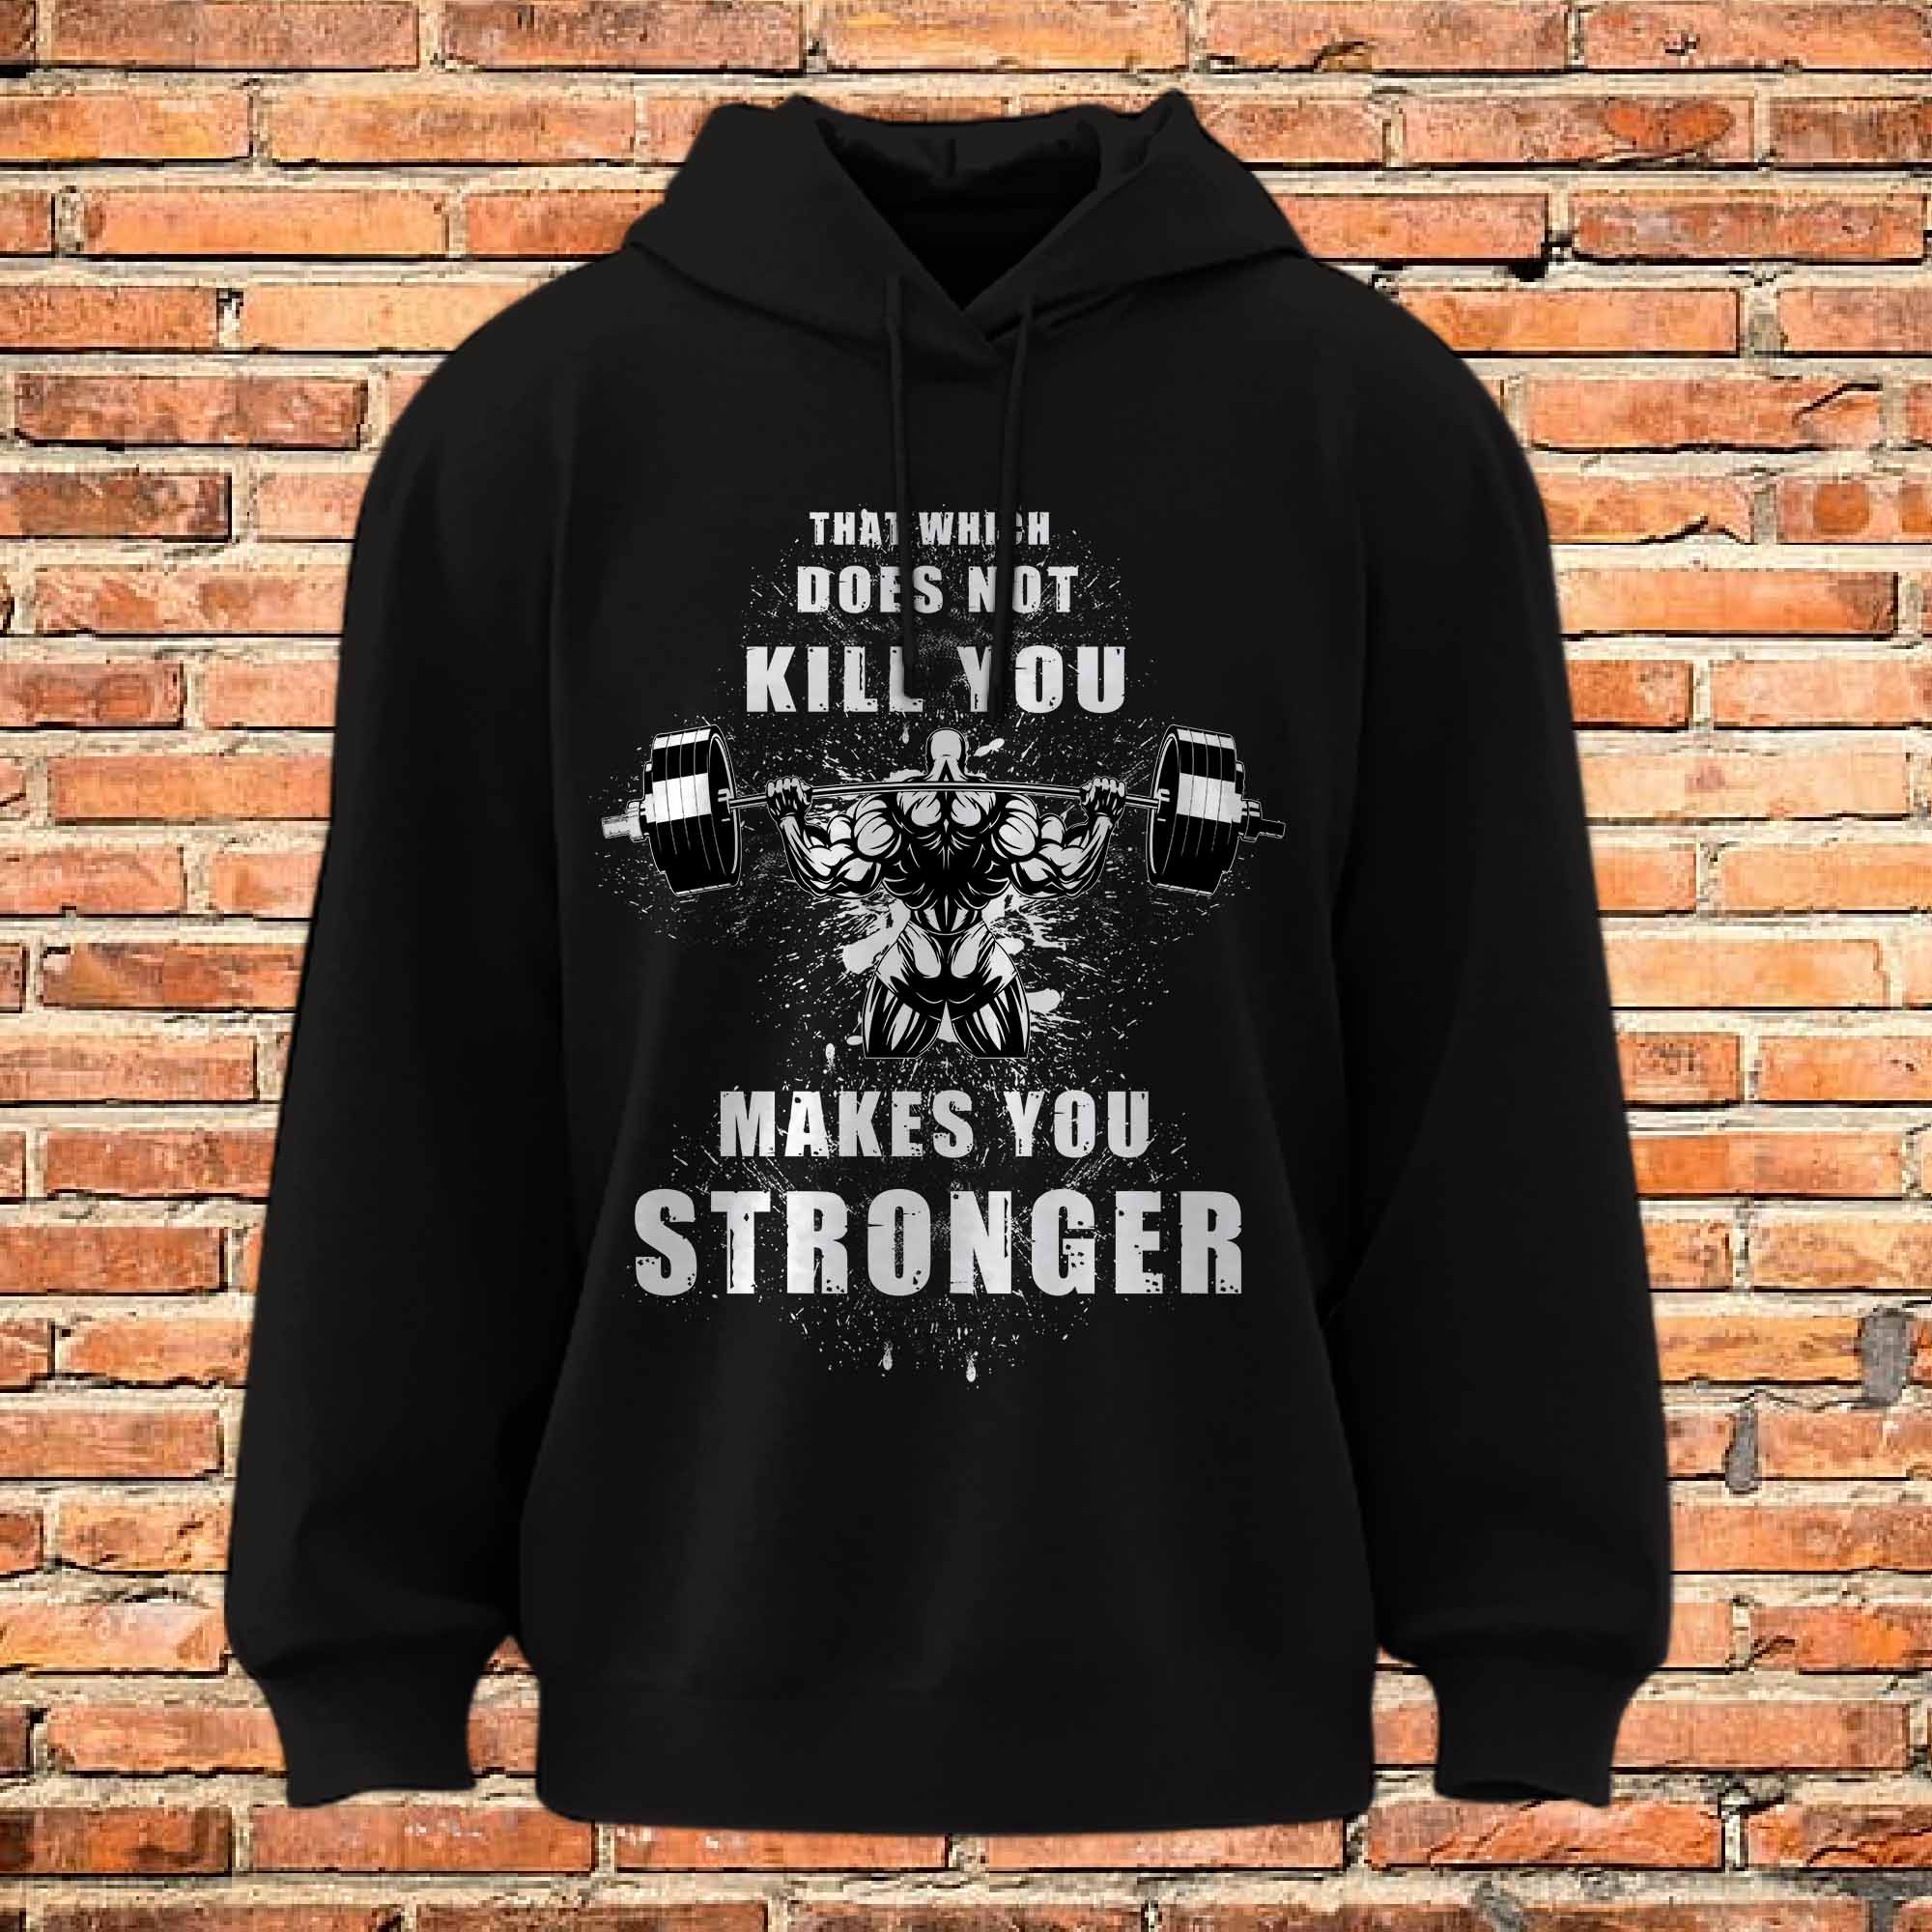 Gym Pump Cover Hoodie Weightlifting Motivation Quotes 11048